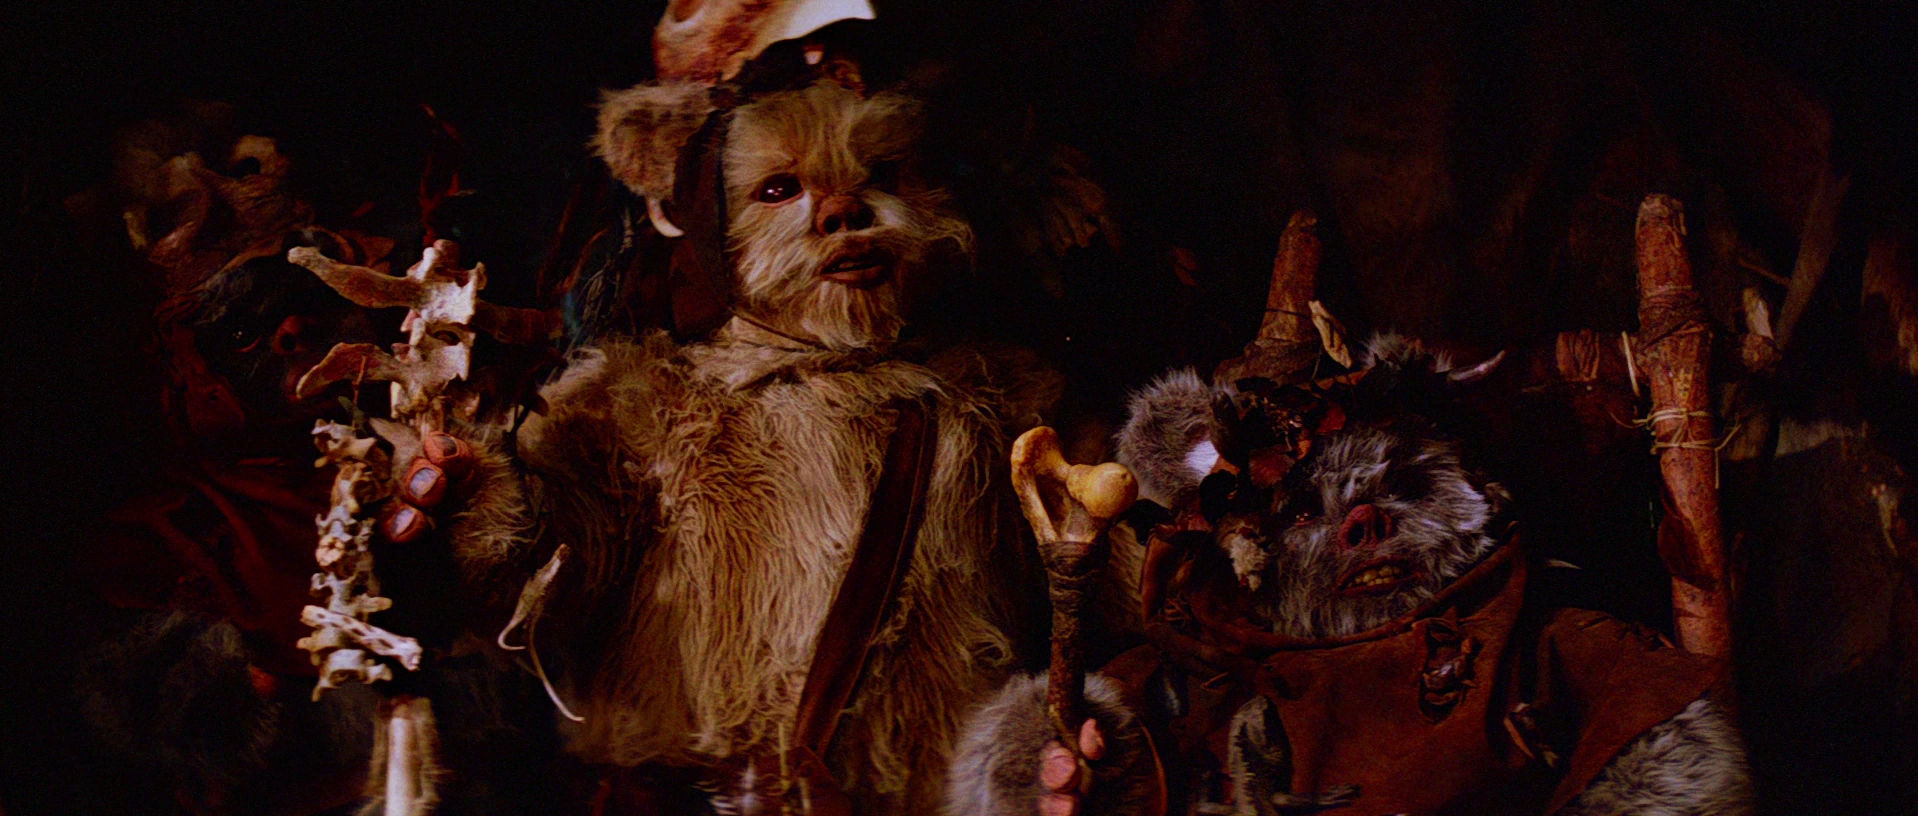 A Chripa Ewok is holding a sticks in his hands.